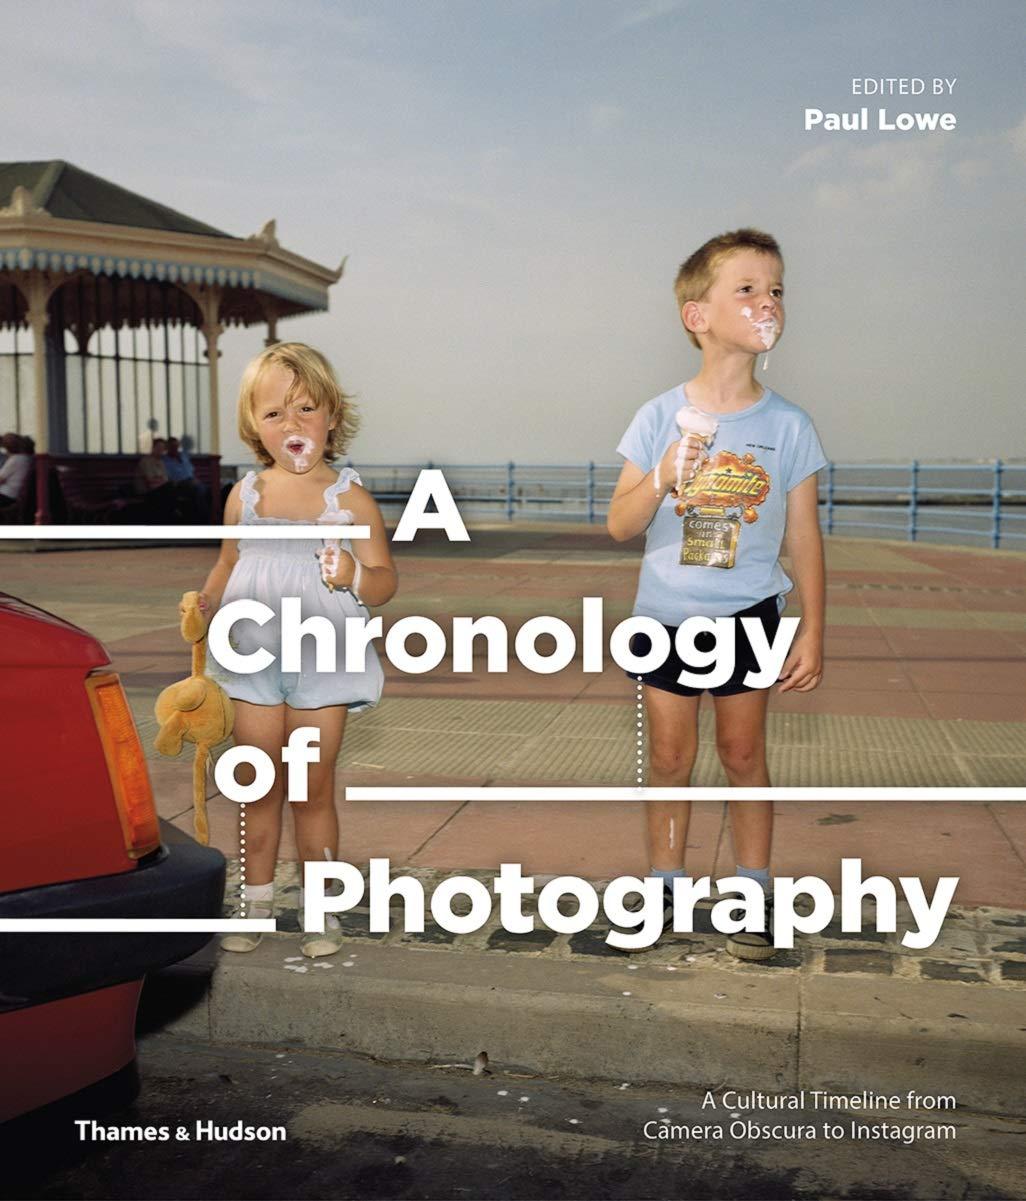 A CHRONOLOGY OF PHOTOGRAPHY 